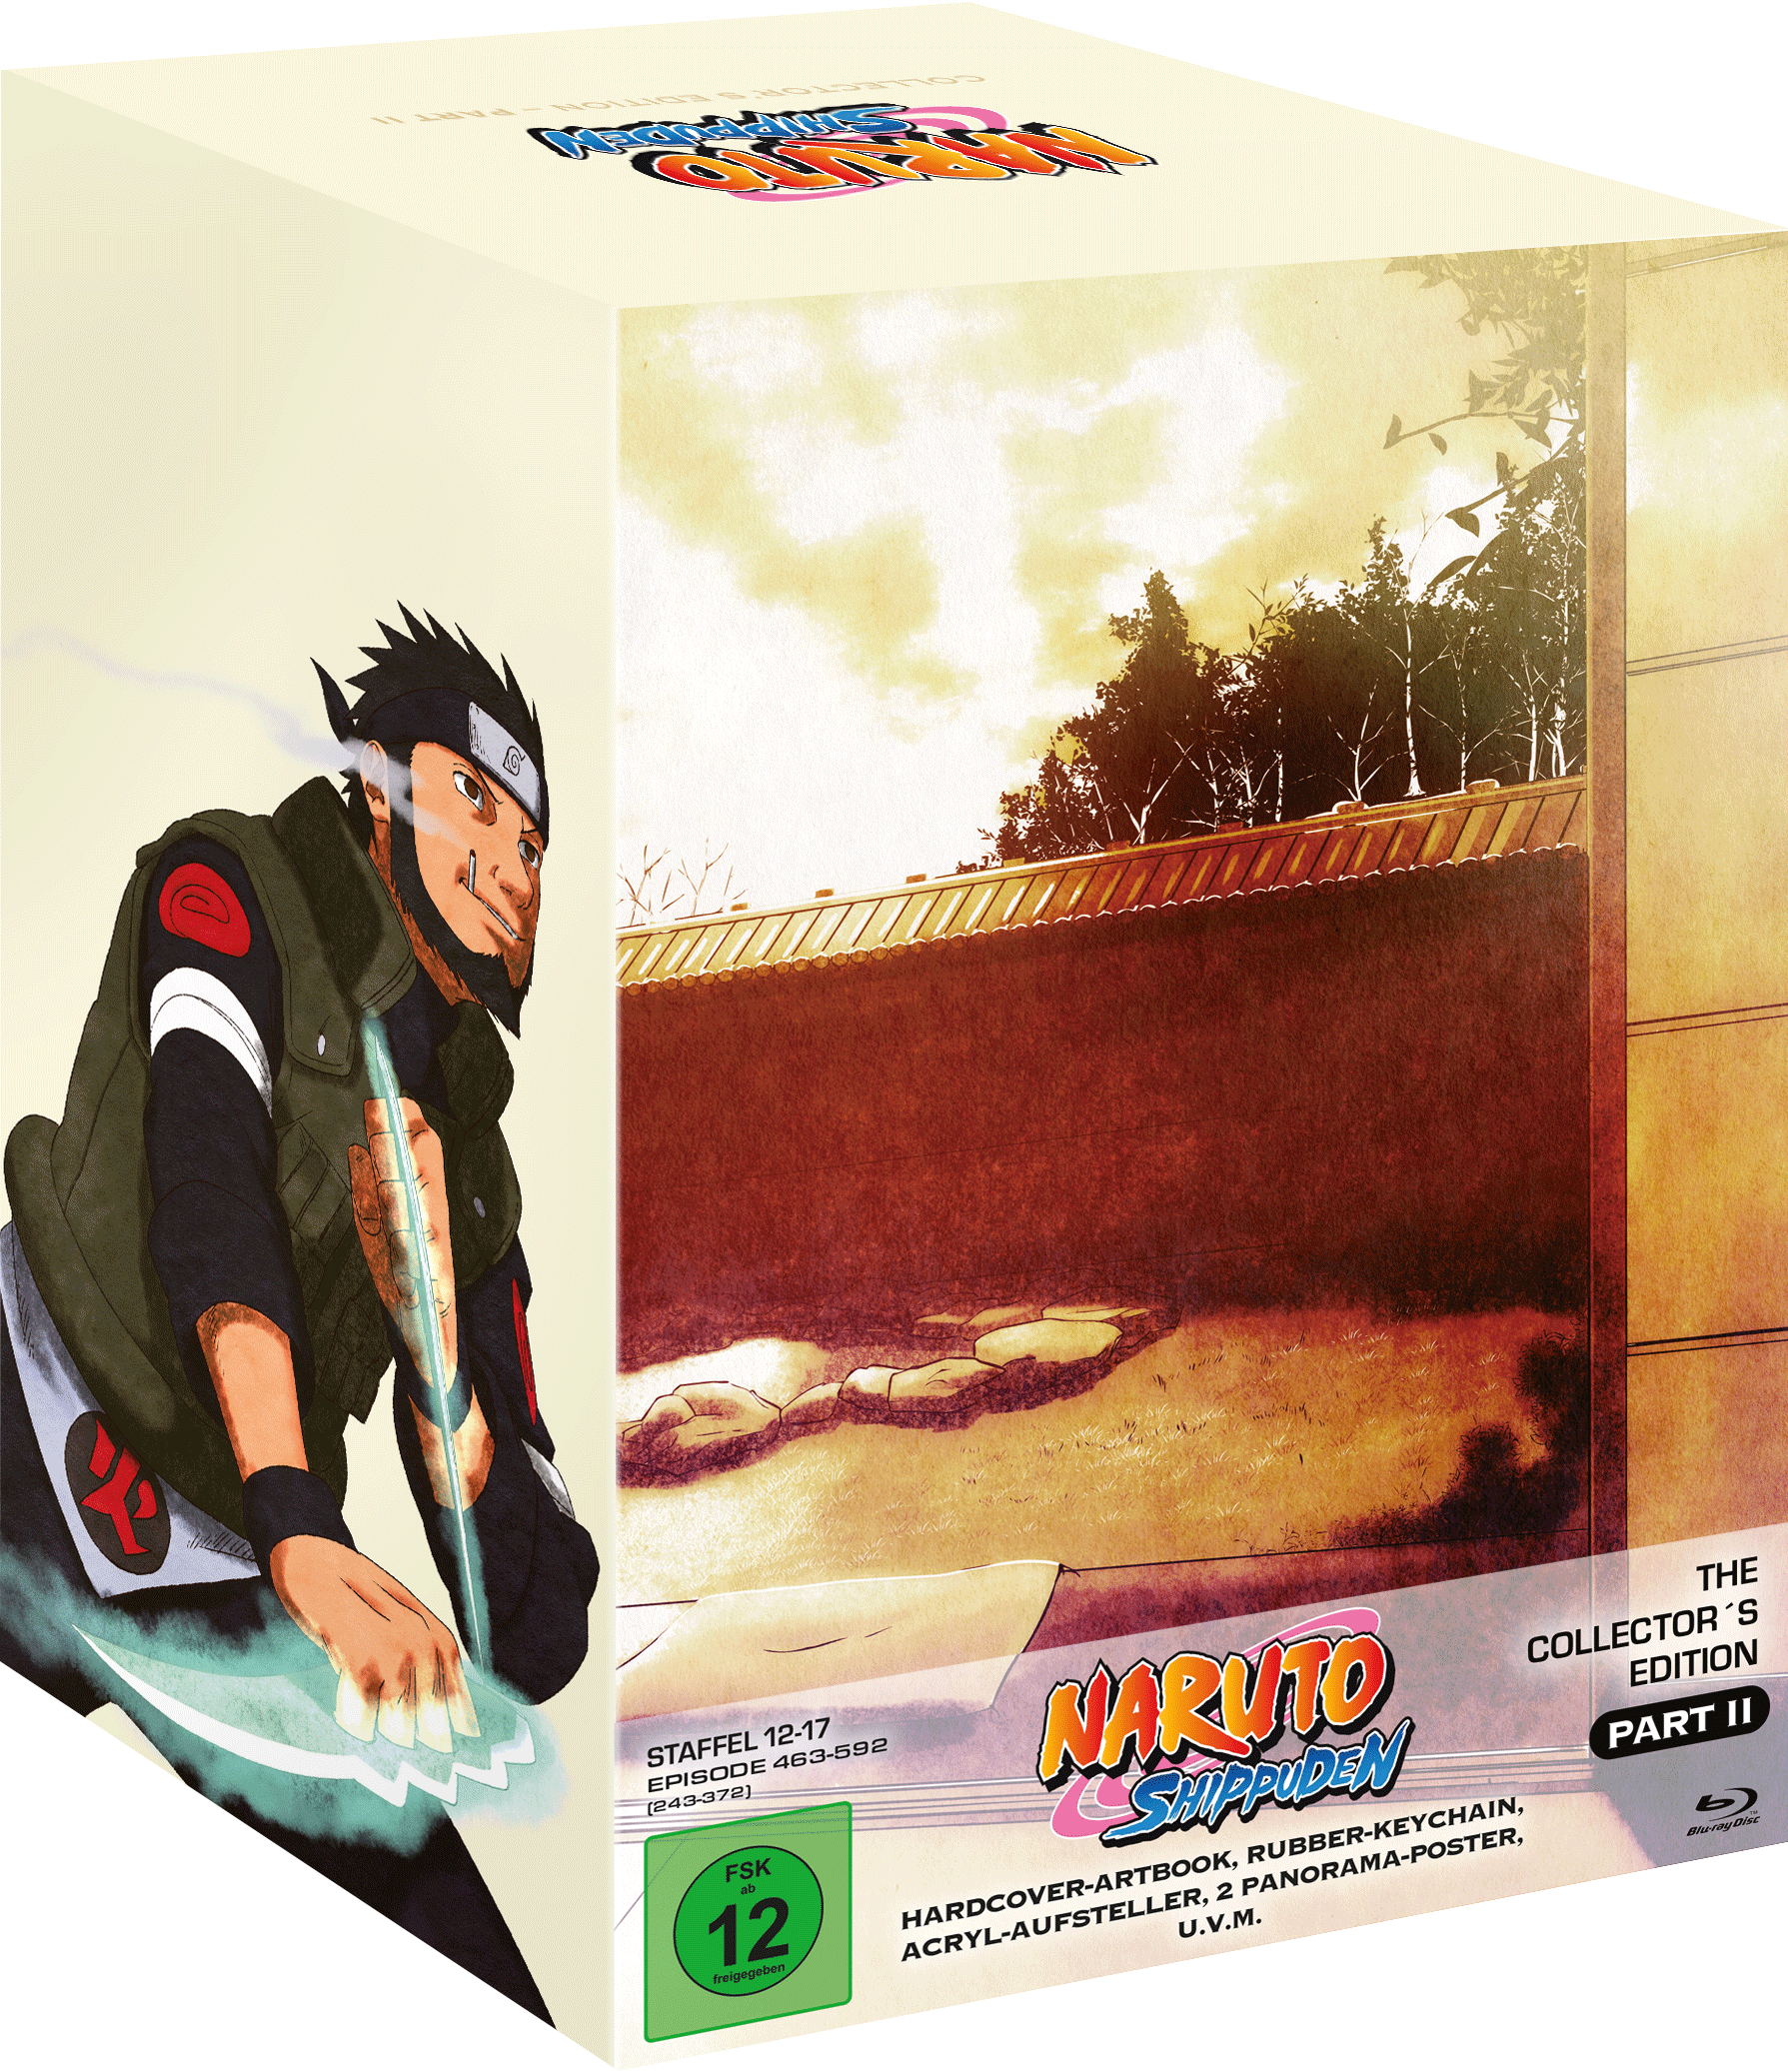 Naruto Shippuden - Collector's Edition Part 2 [Blu-ray] Image 3